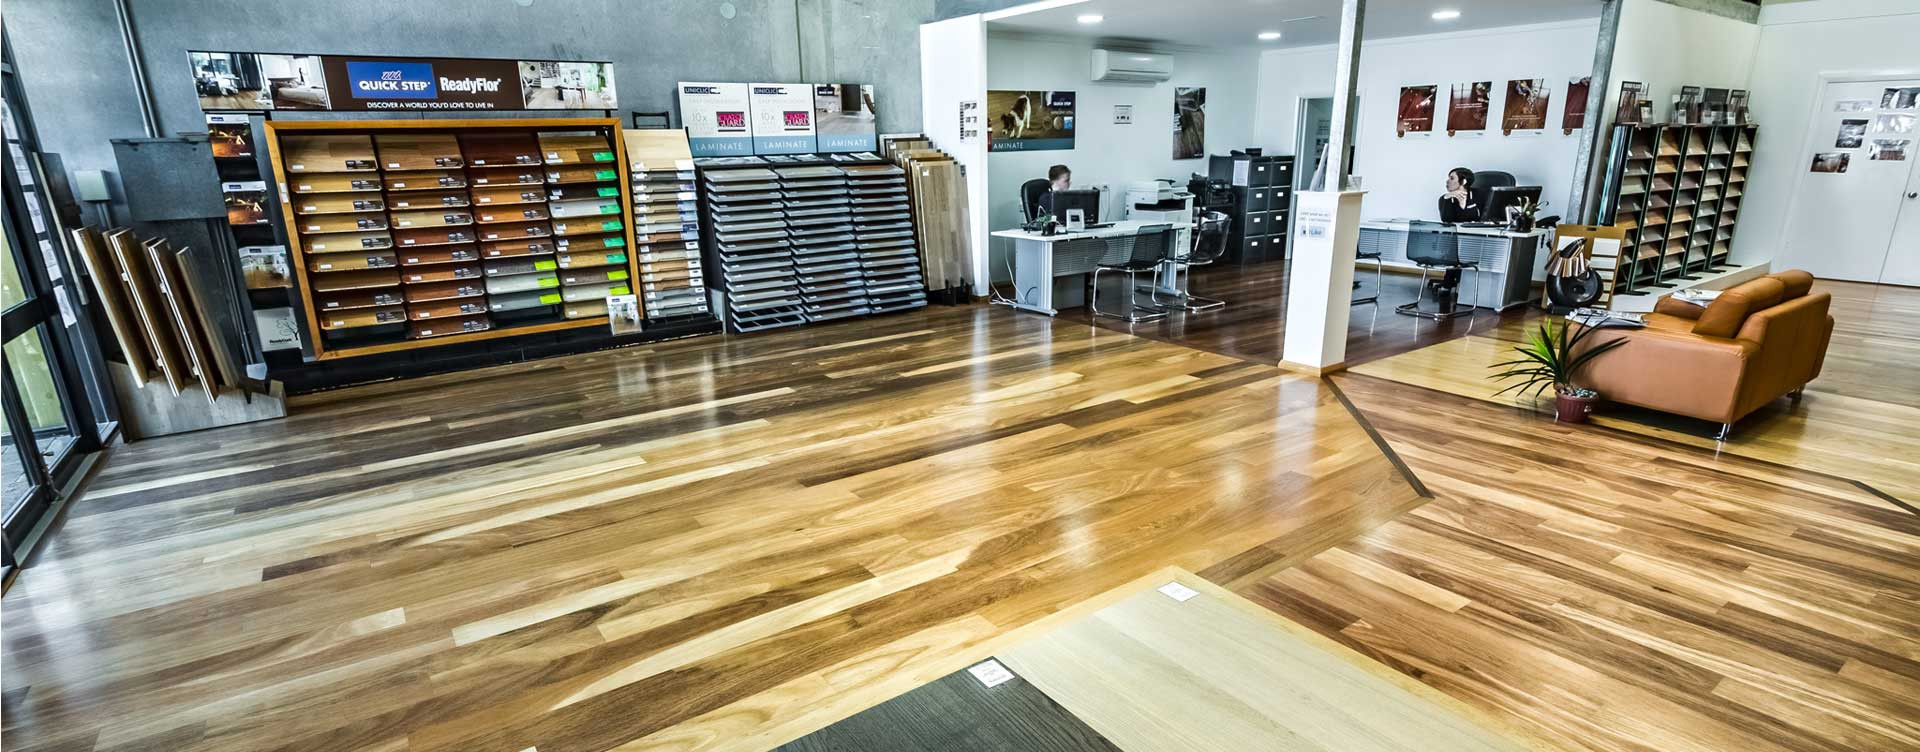 11 Recommended Wide Plank Laminate Hardwood Flooring 2023 free download wide plank laminate hardwood flooring of timber flooring perth coastal flooring wa quality wooden regarding thats why they call us the home of fine wood floors